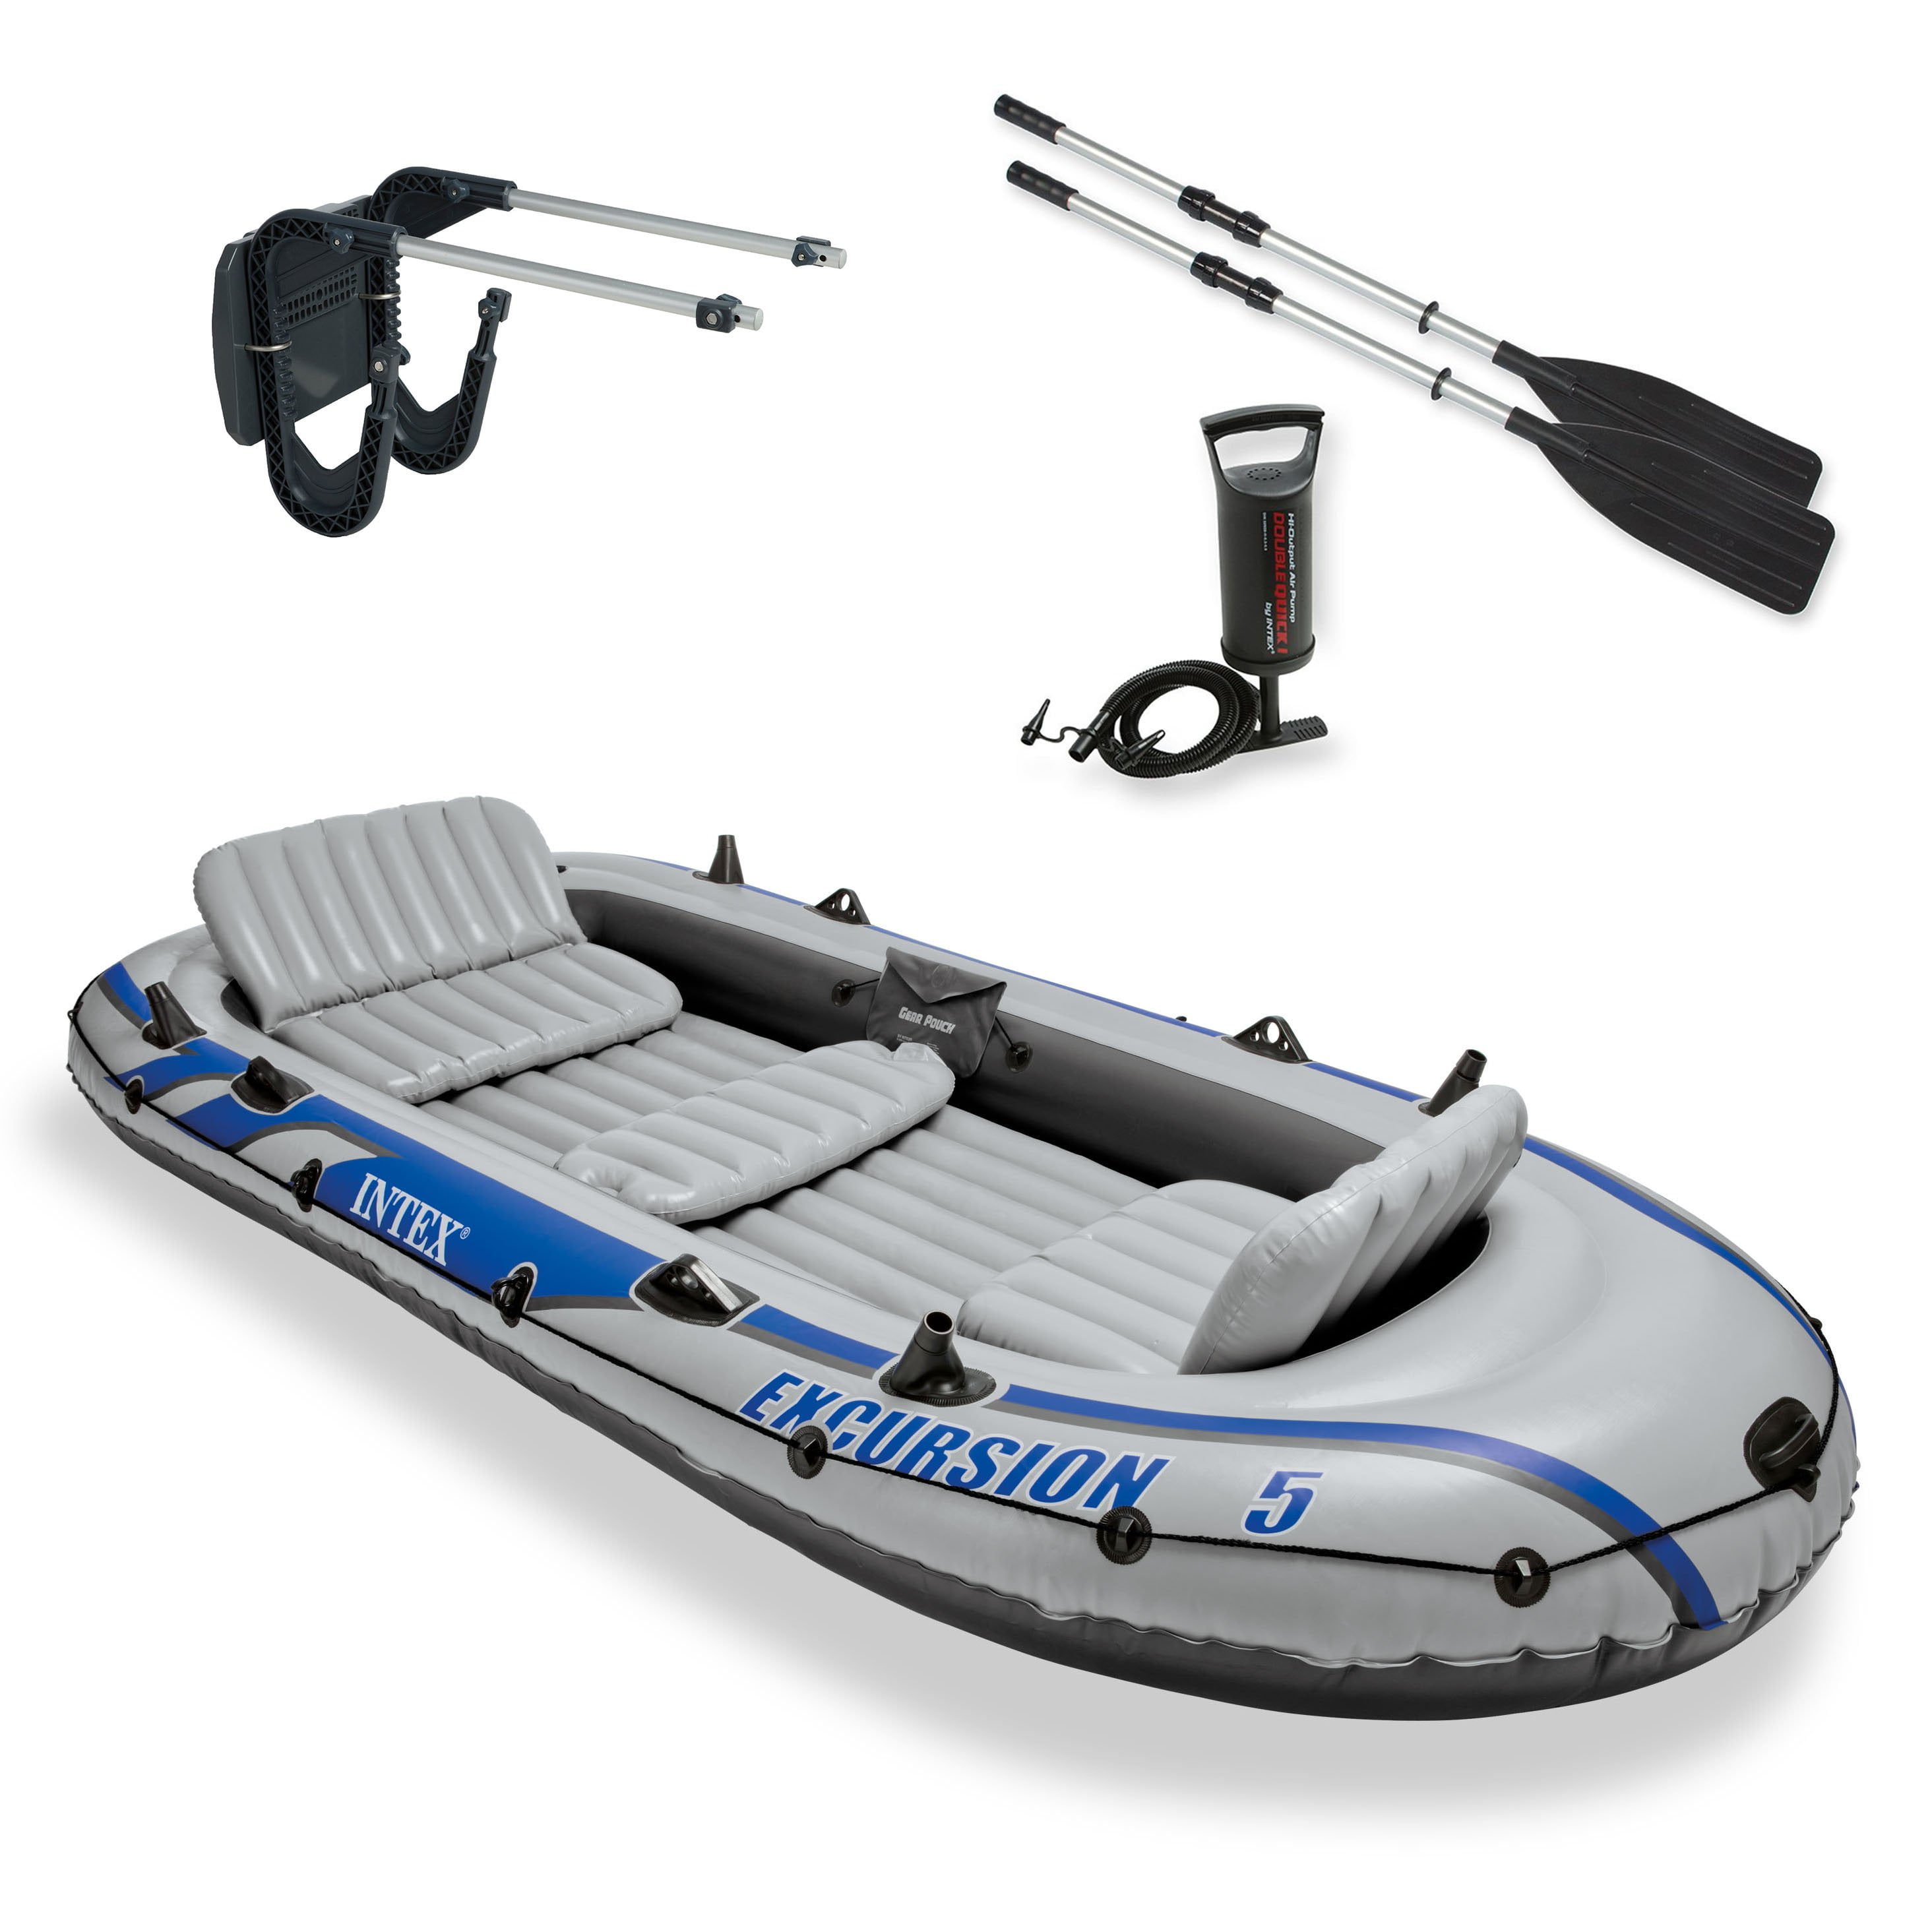 Motor Mount... Intex Excursion 5 Inflatable Rafting and Fishing Boat with Oars 